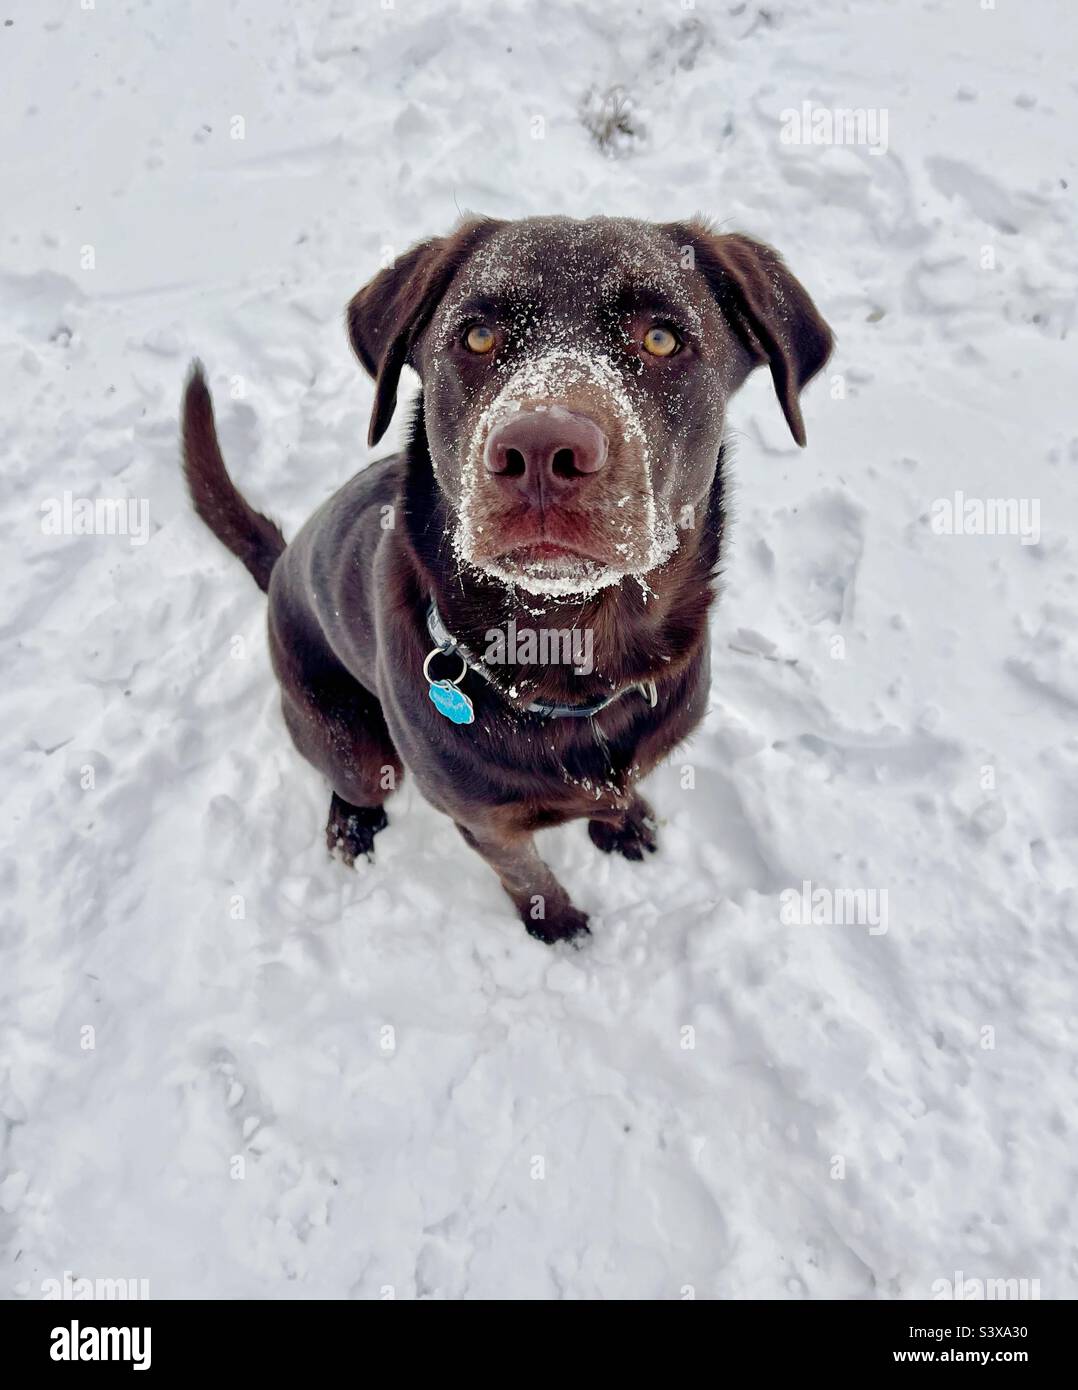 Chocolate Lab with snow covered face Stock Photo